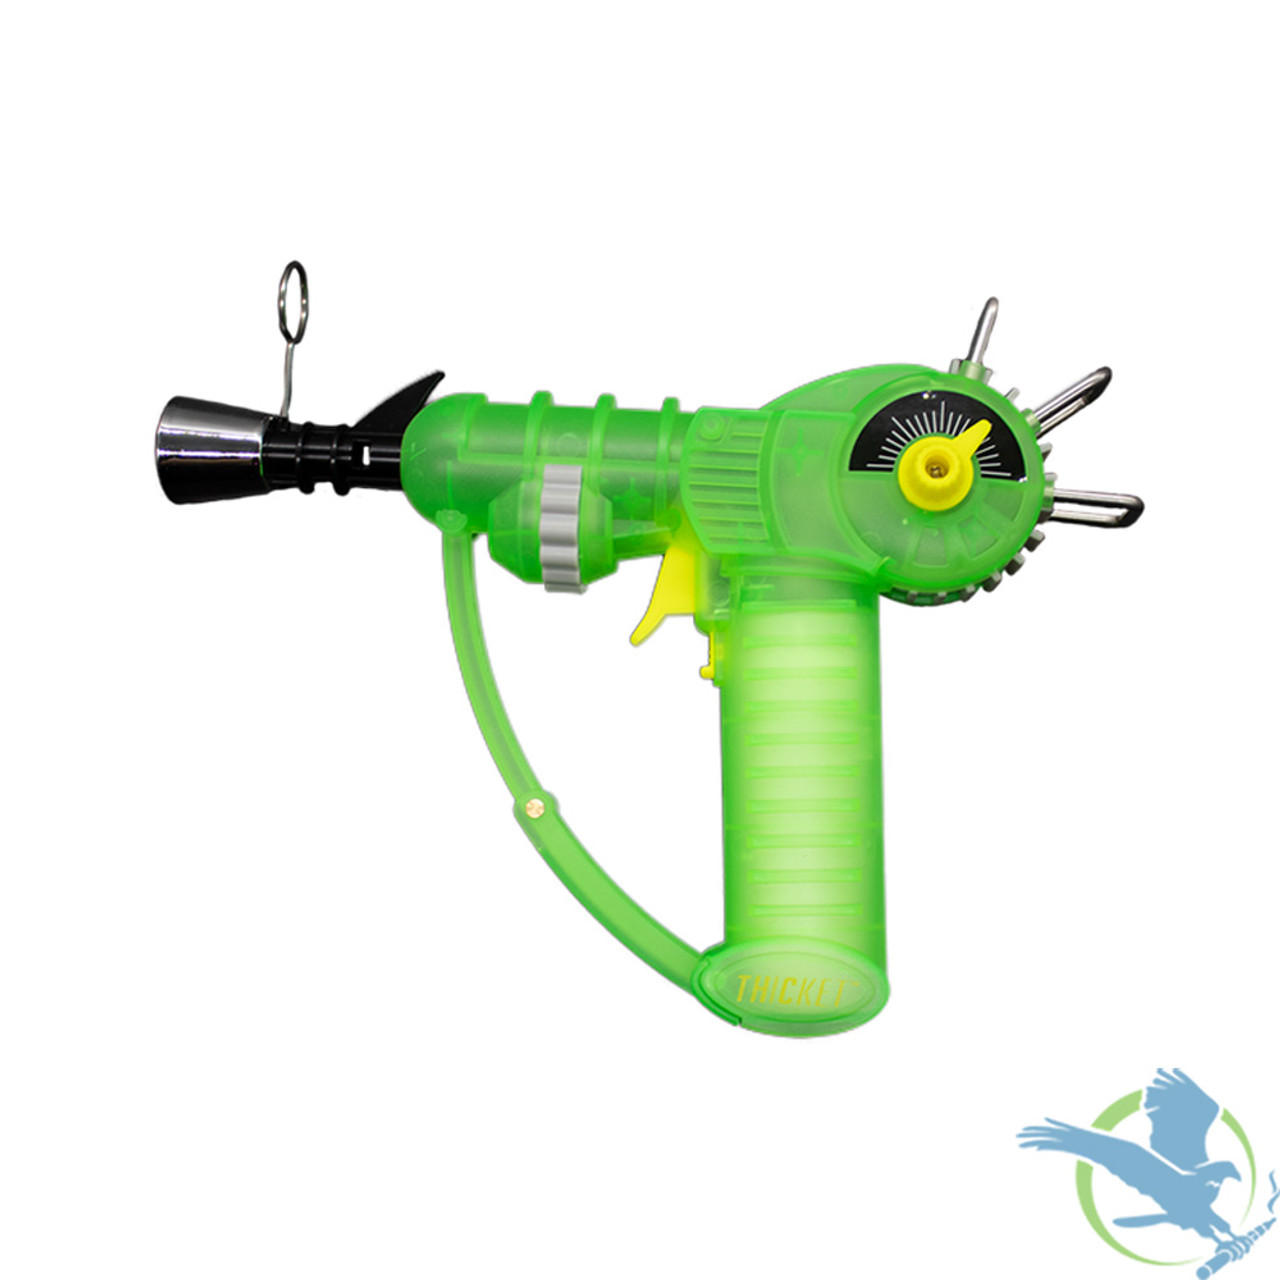 Thicket Spaceout Ray Gun Glow In The Dark Adjustable Flame Butane Torch  With Kickstand (MSRP $39.99)